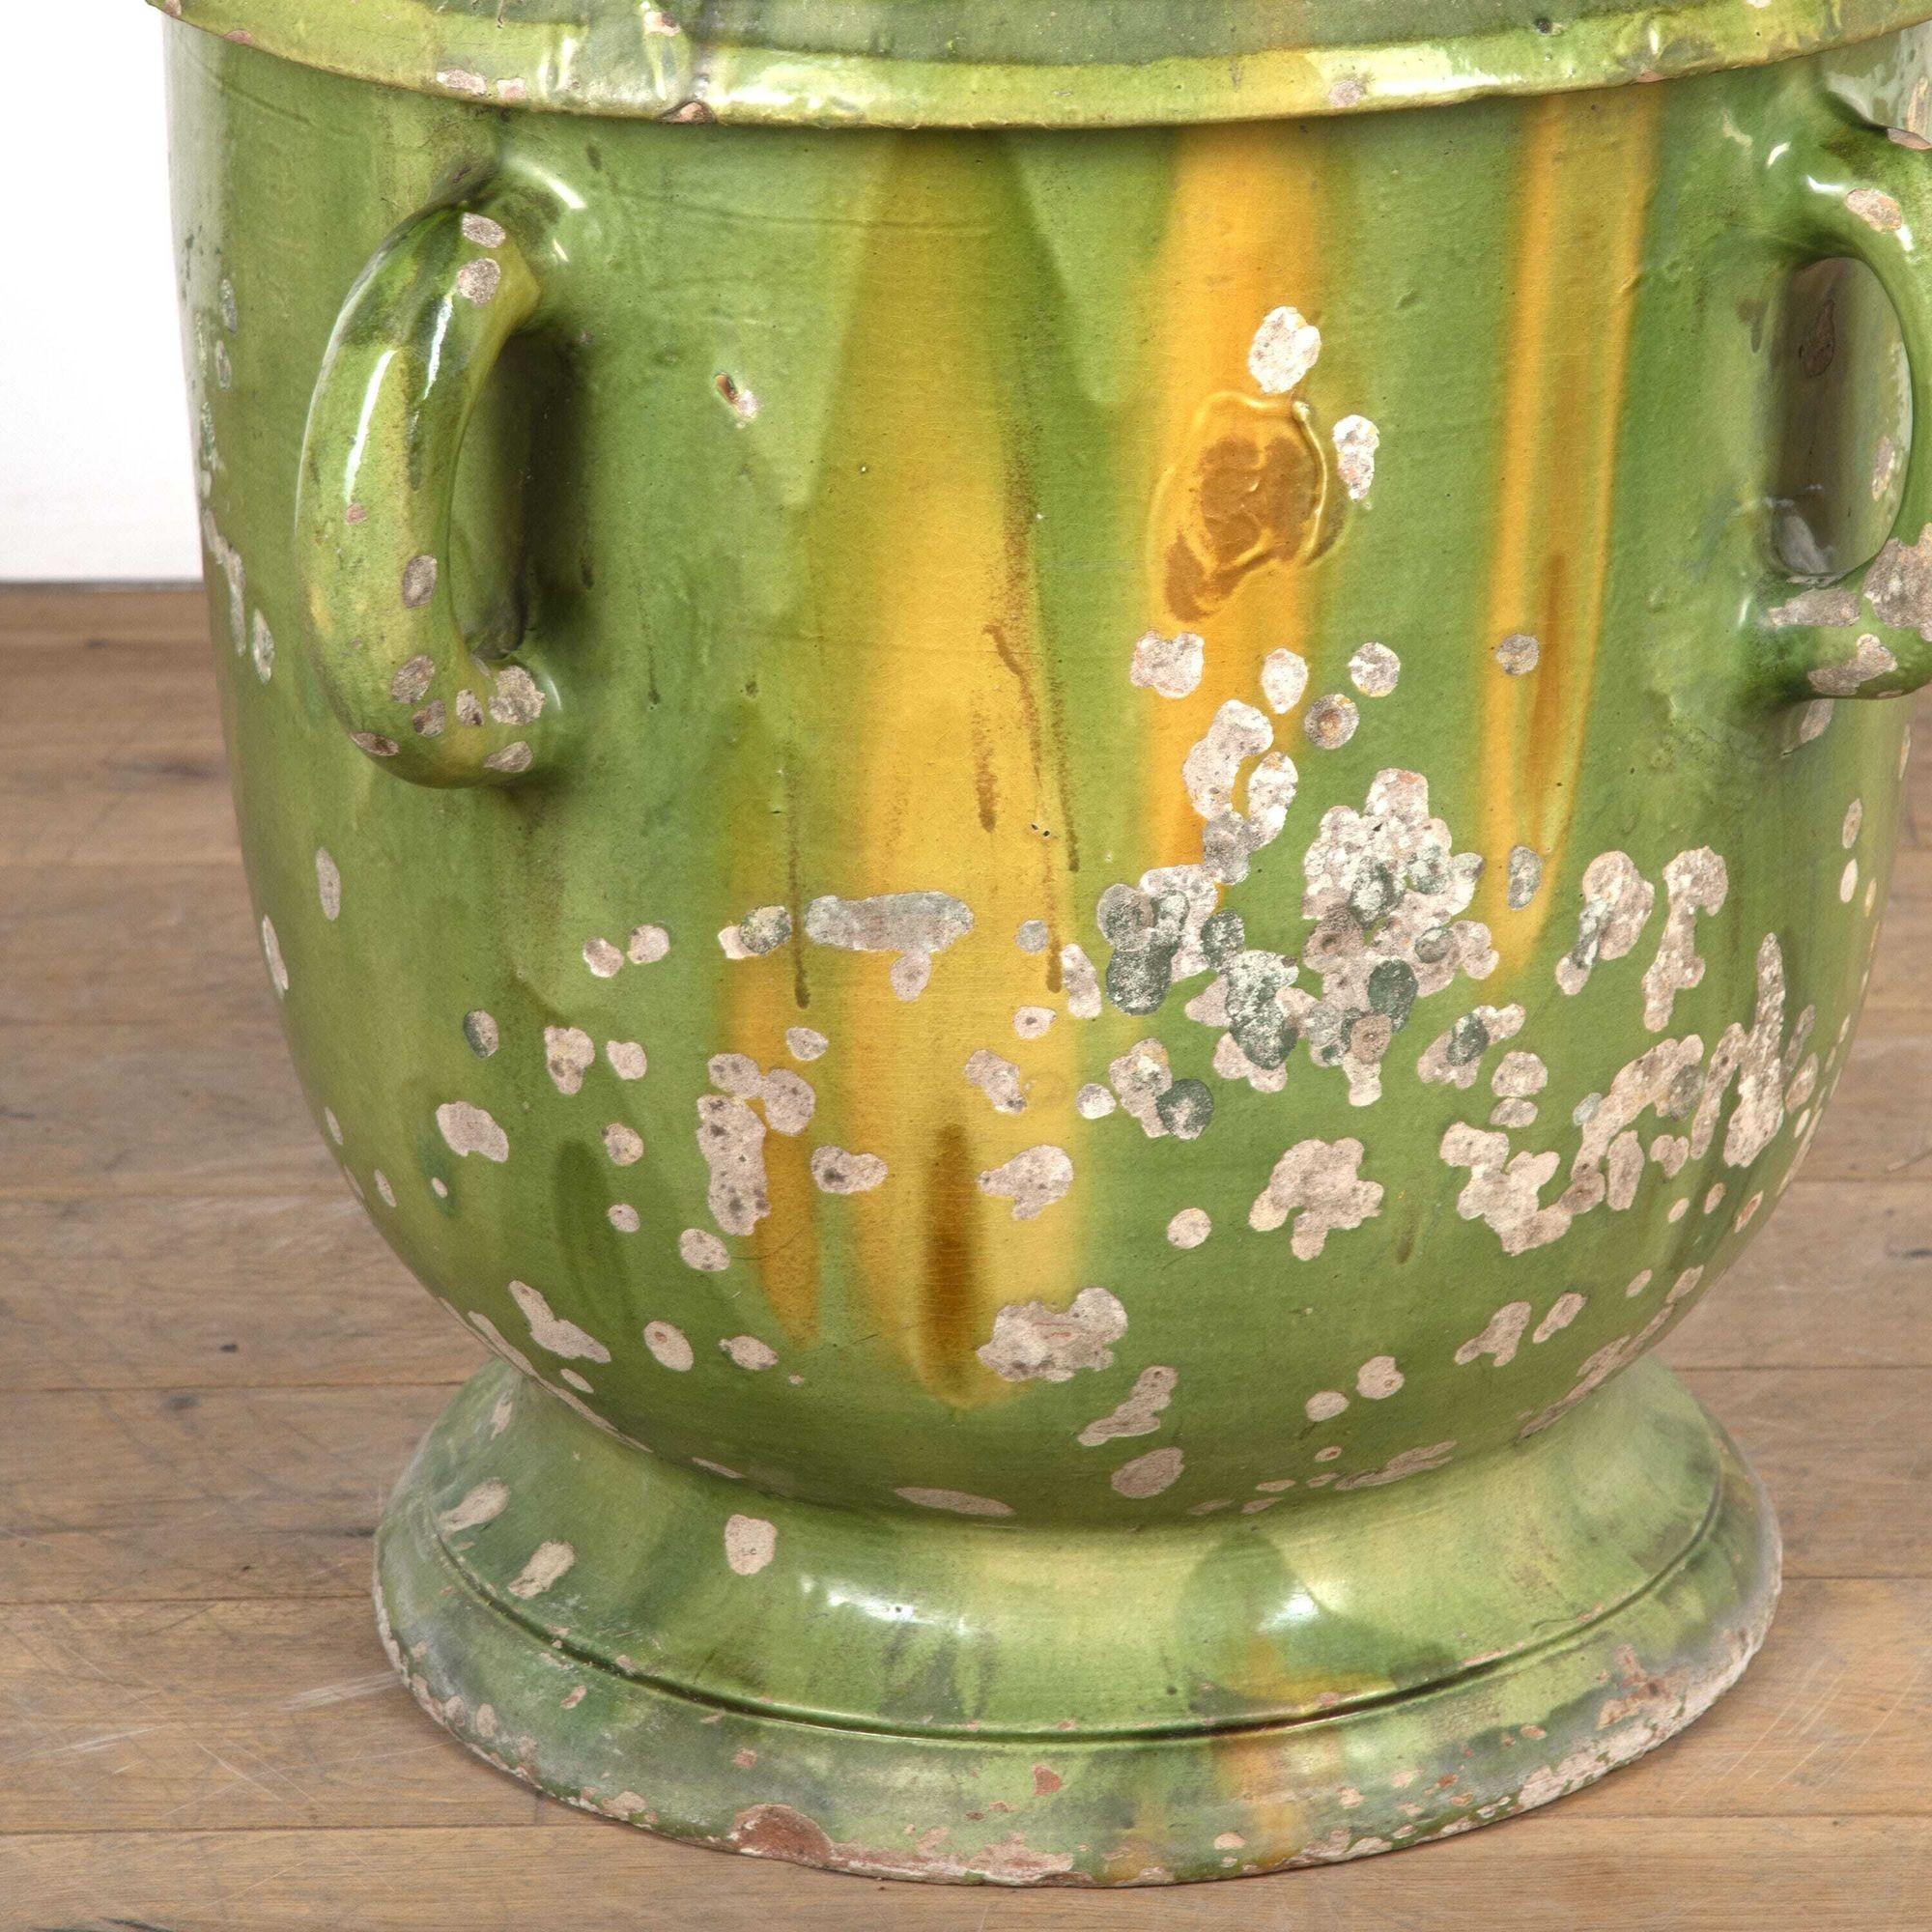 Gorgeous 19th Century French terracotta planter.
In a fantastic green glaze, this large planter is from Castelnaudry.
This would make a fabulous vase in any home or garden.